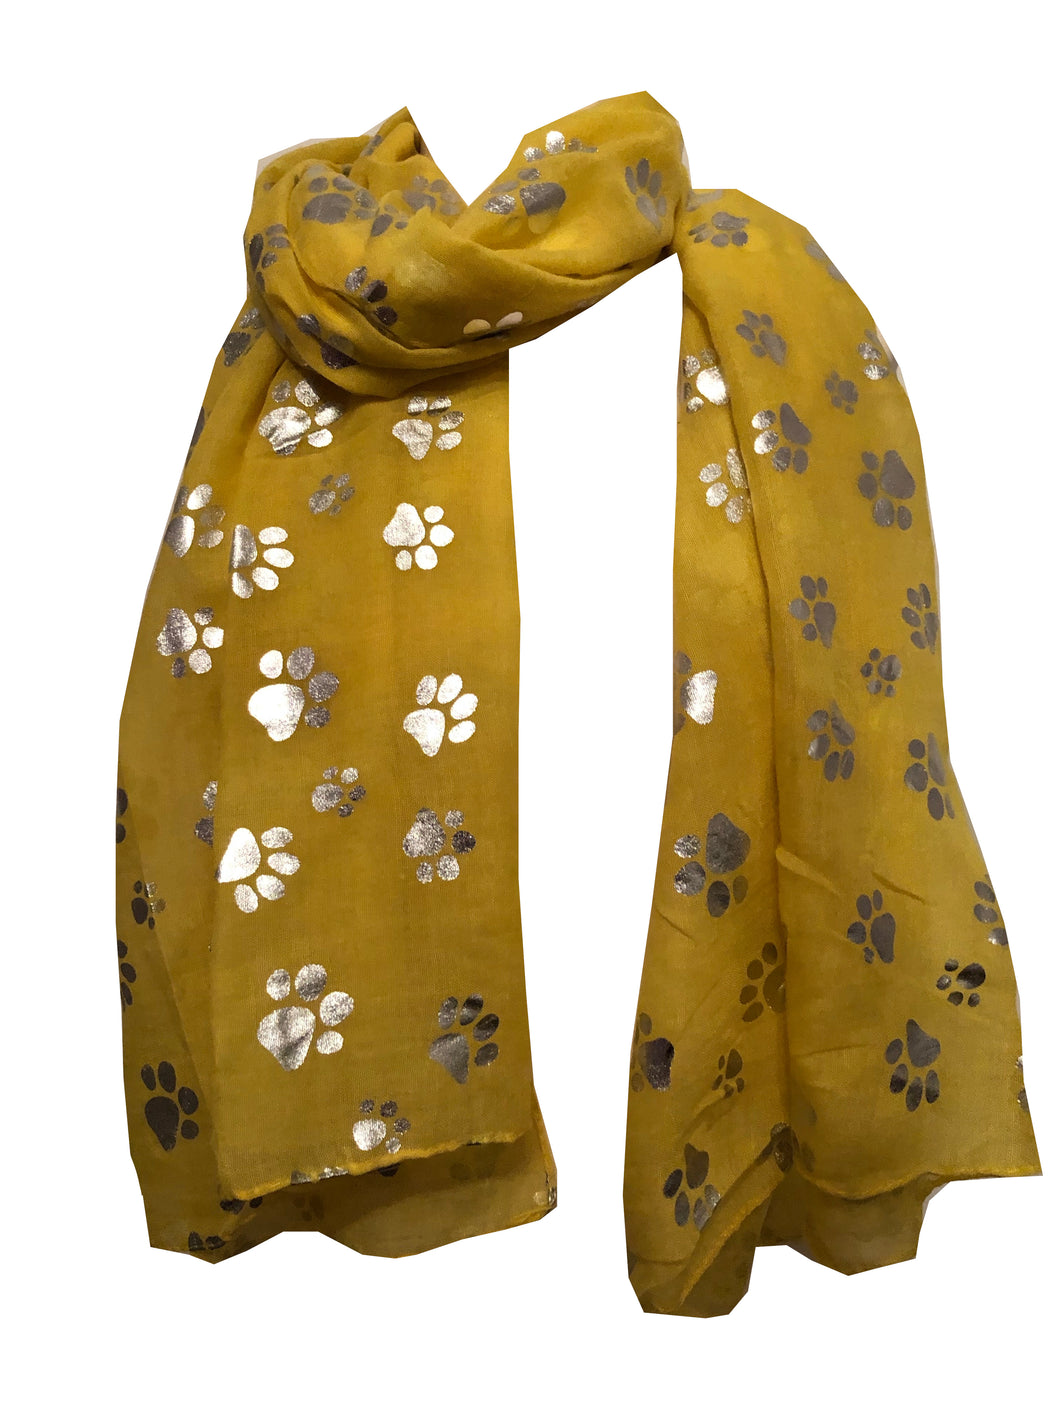 Pamper Yourself Now Yellow with Silver Dog paw Print Long Scarf.